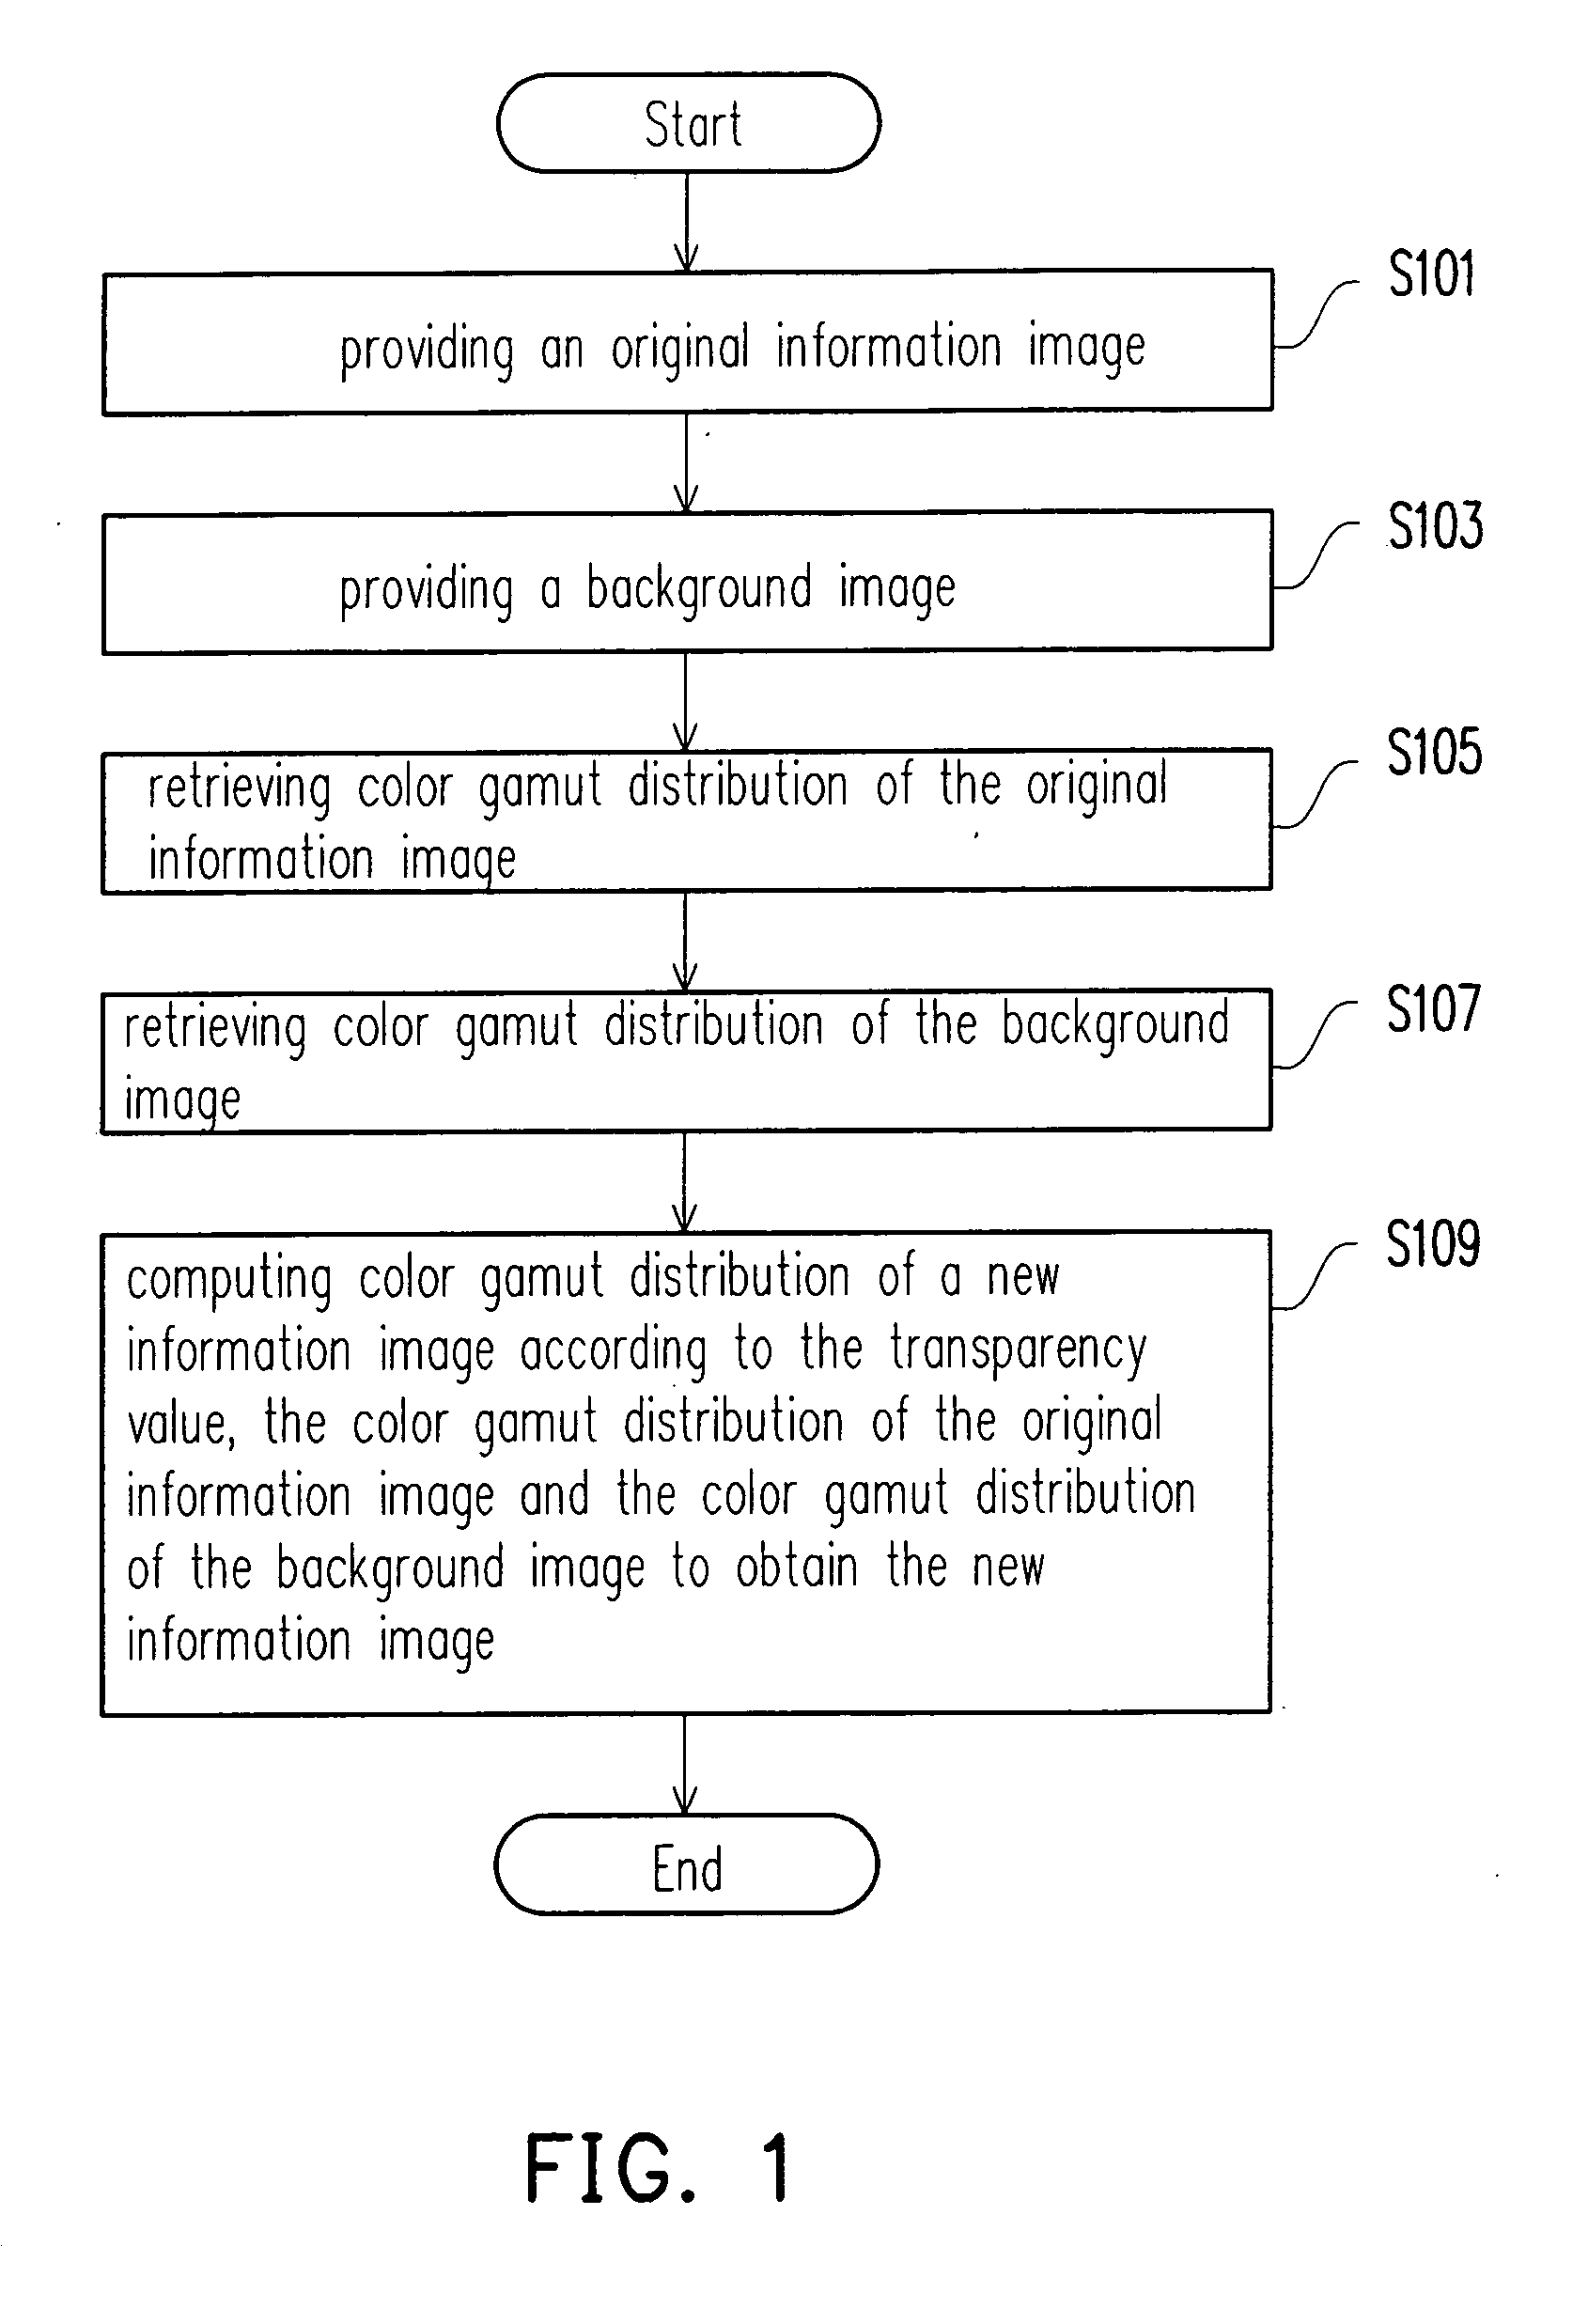 Display method and management module for image before entering operating system